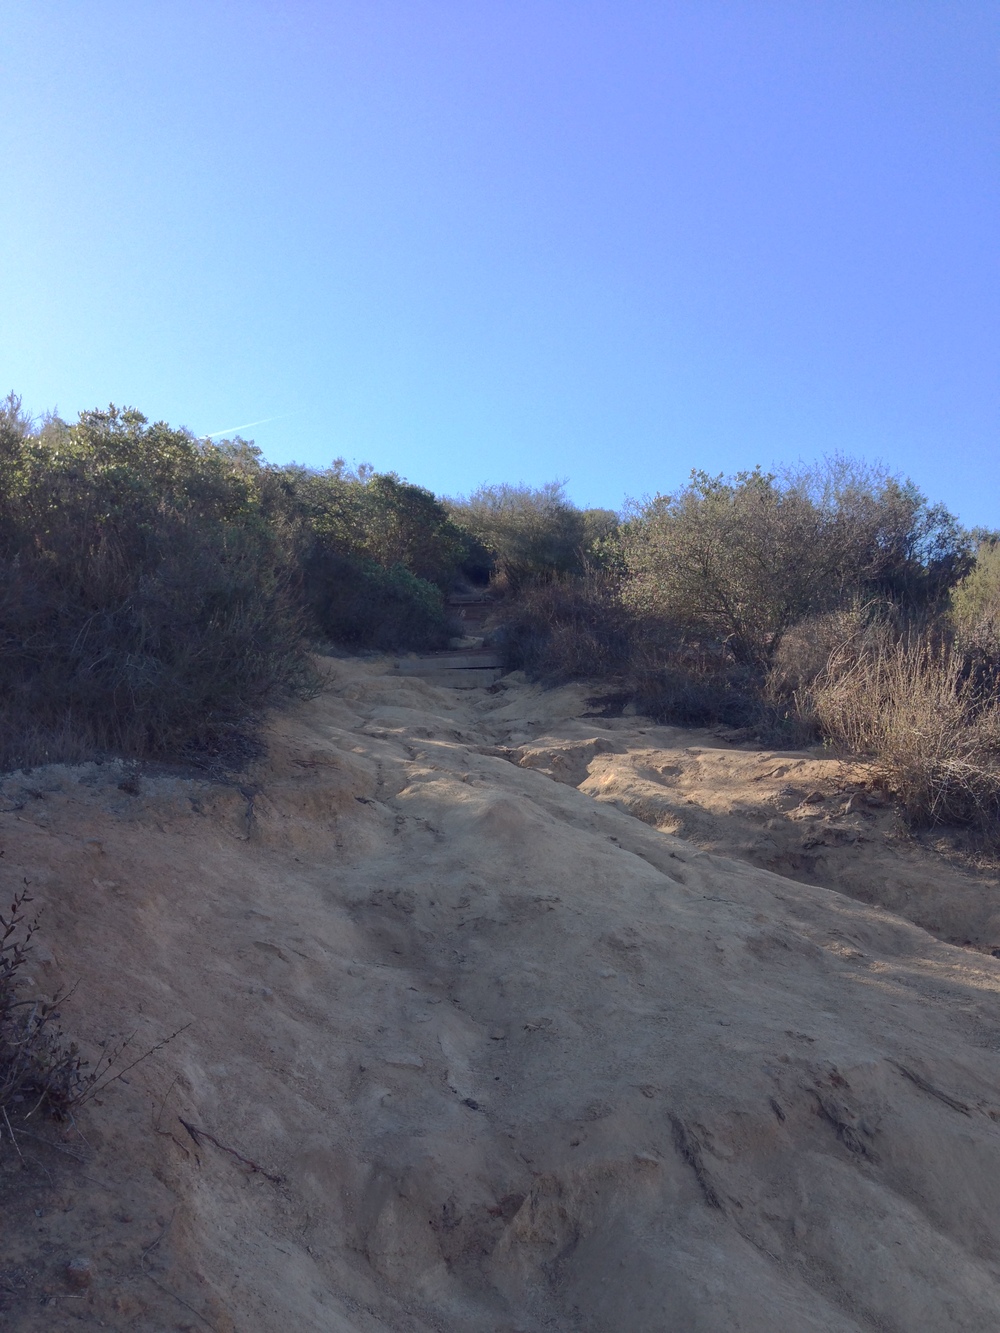 Try this San Diego County hike: Kwaay Paay Peak at Mission Trails